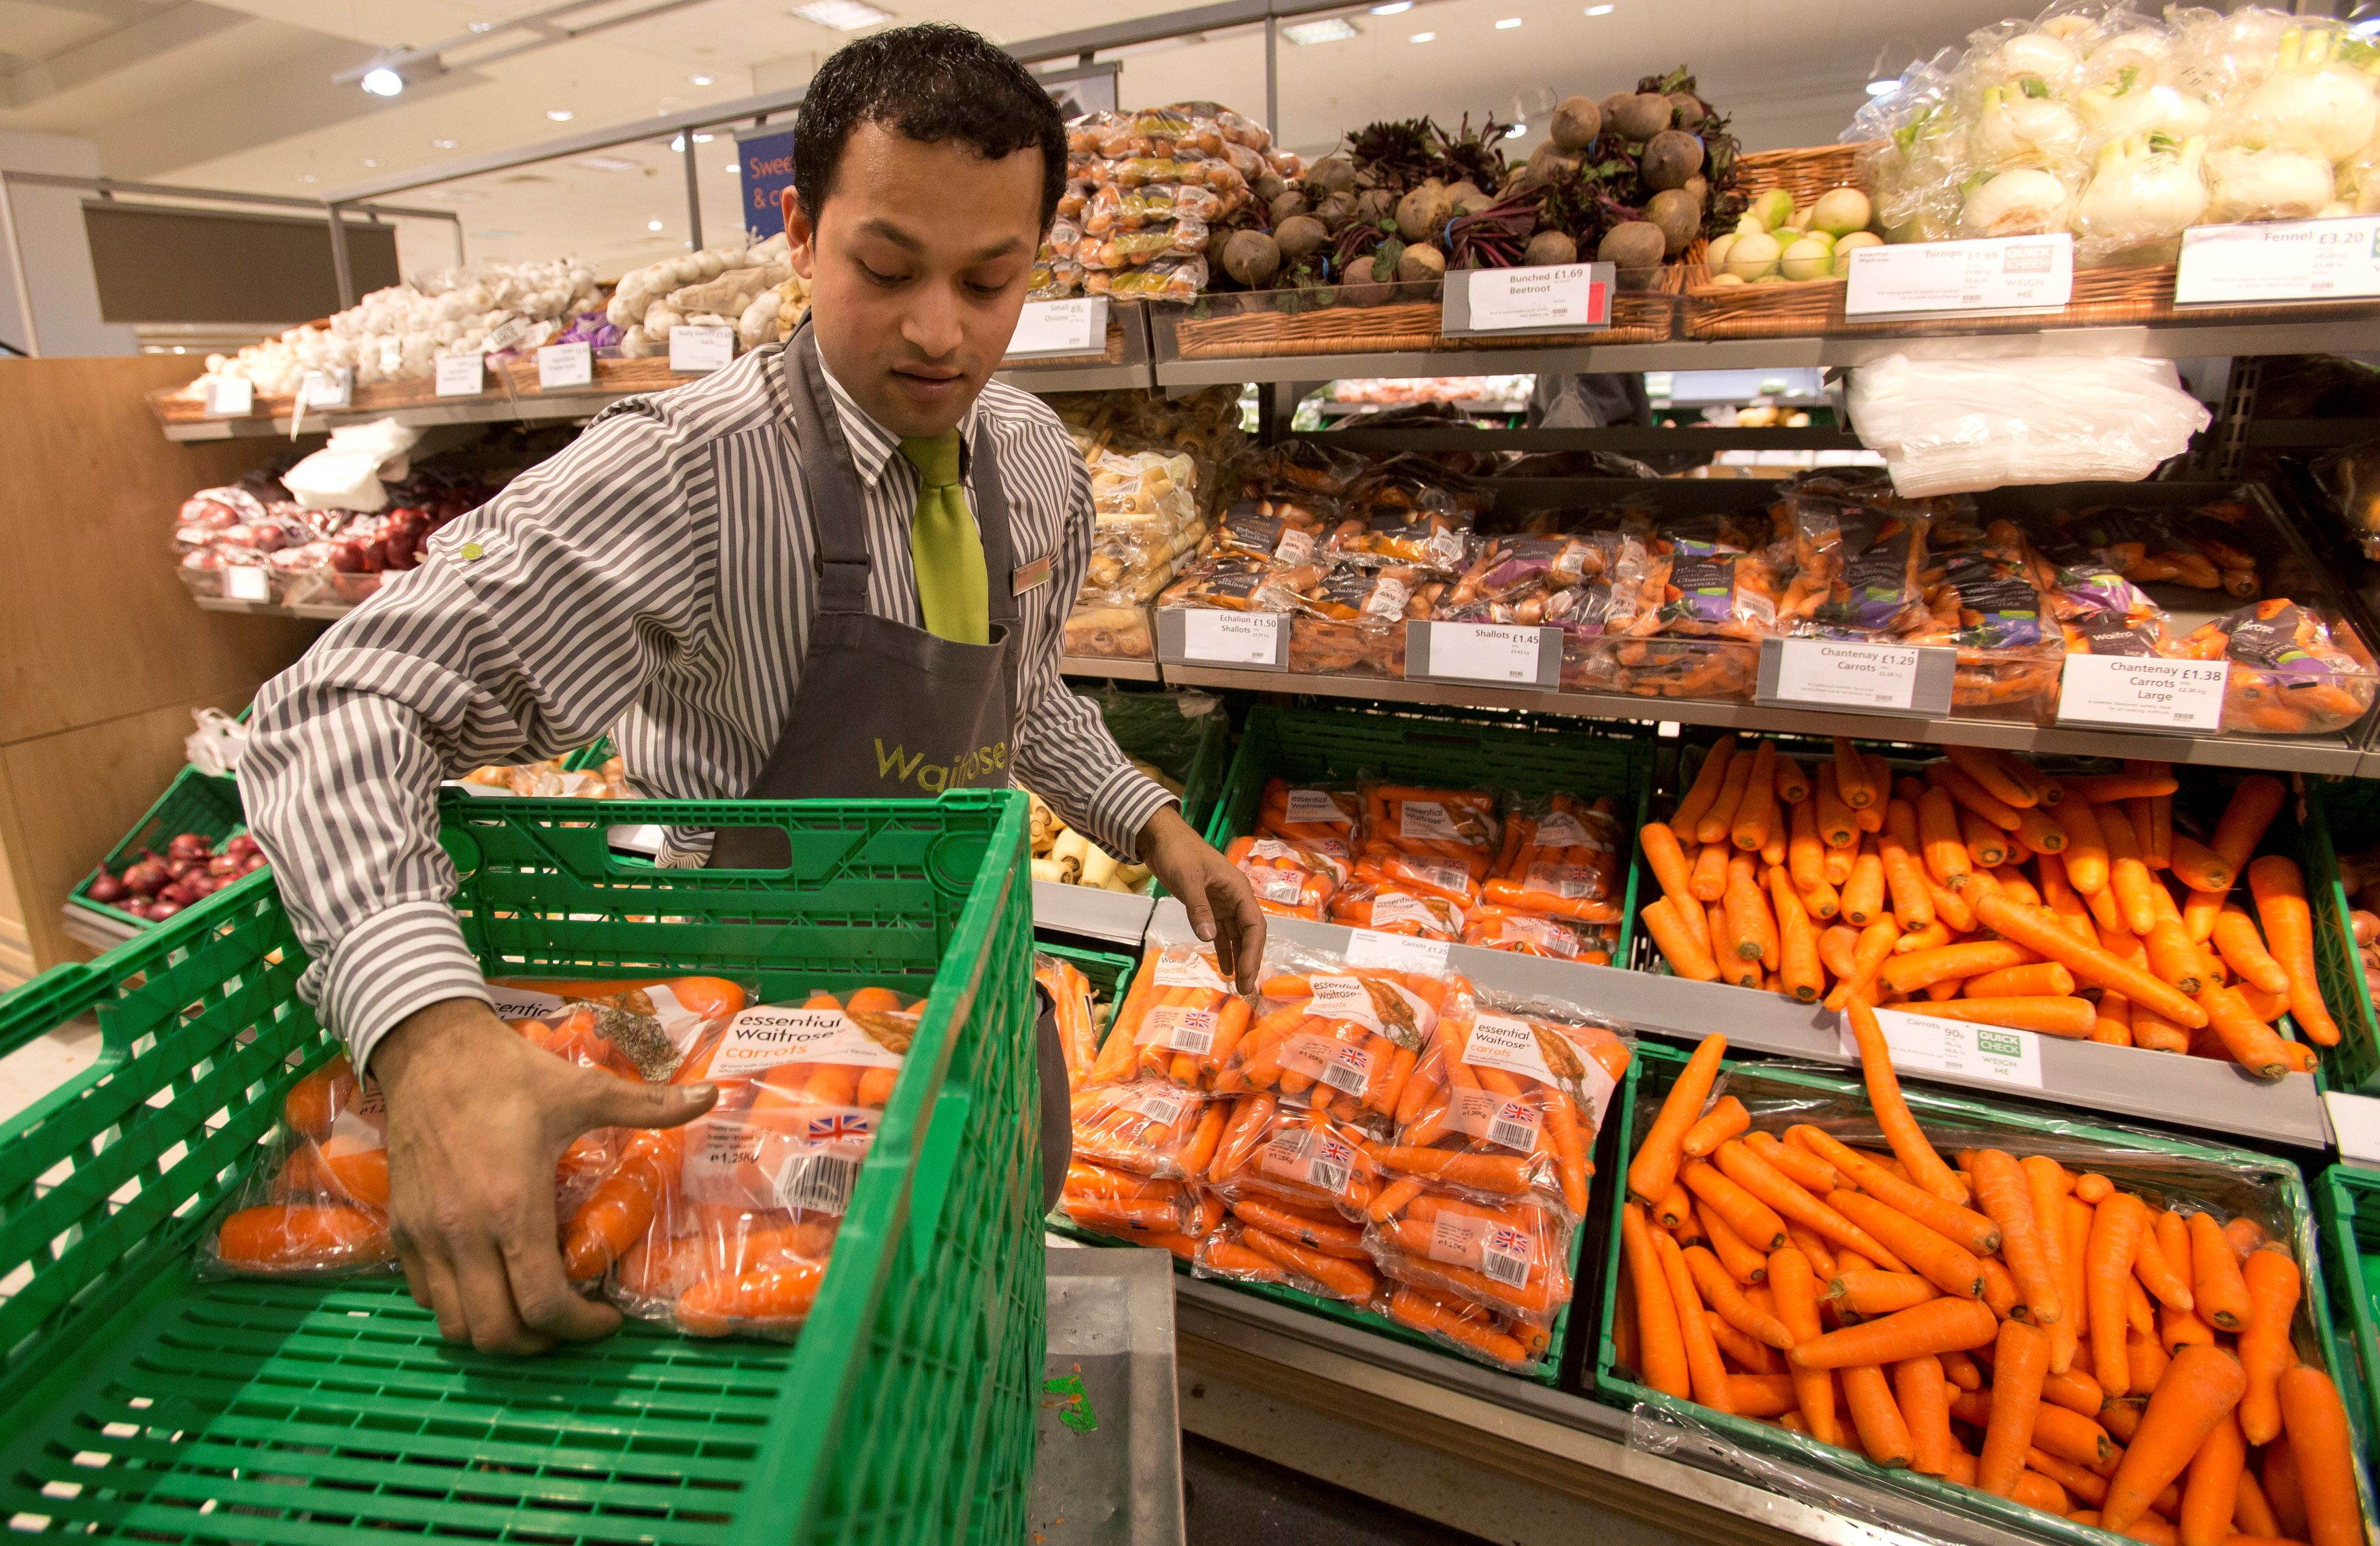 A worker stocks produce shelves in the Canary Wharf store of Waitrose in London